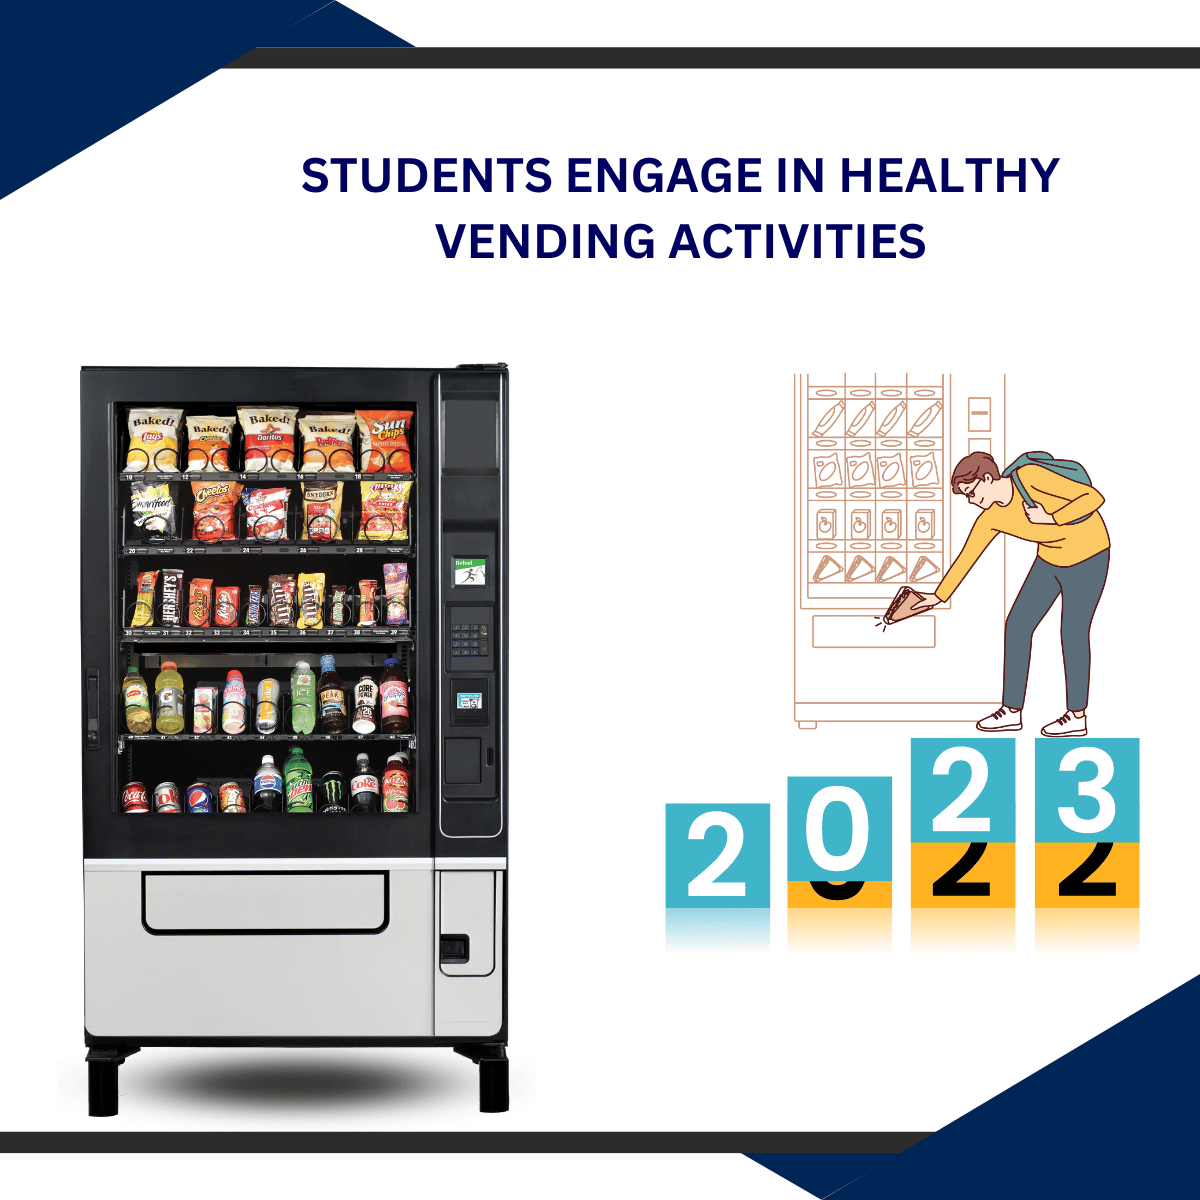 VENDING IN THE NEWS: STUDENTS ENGAGE IN HEALTHY VENDING ACTIVITIES